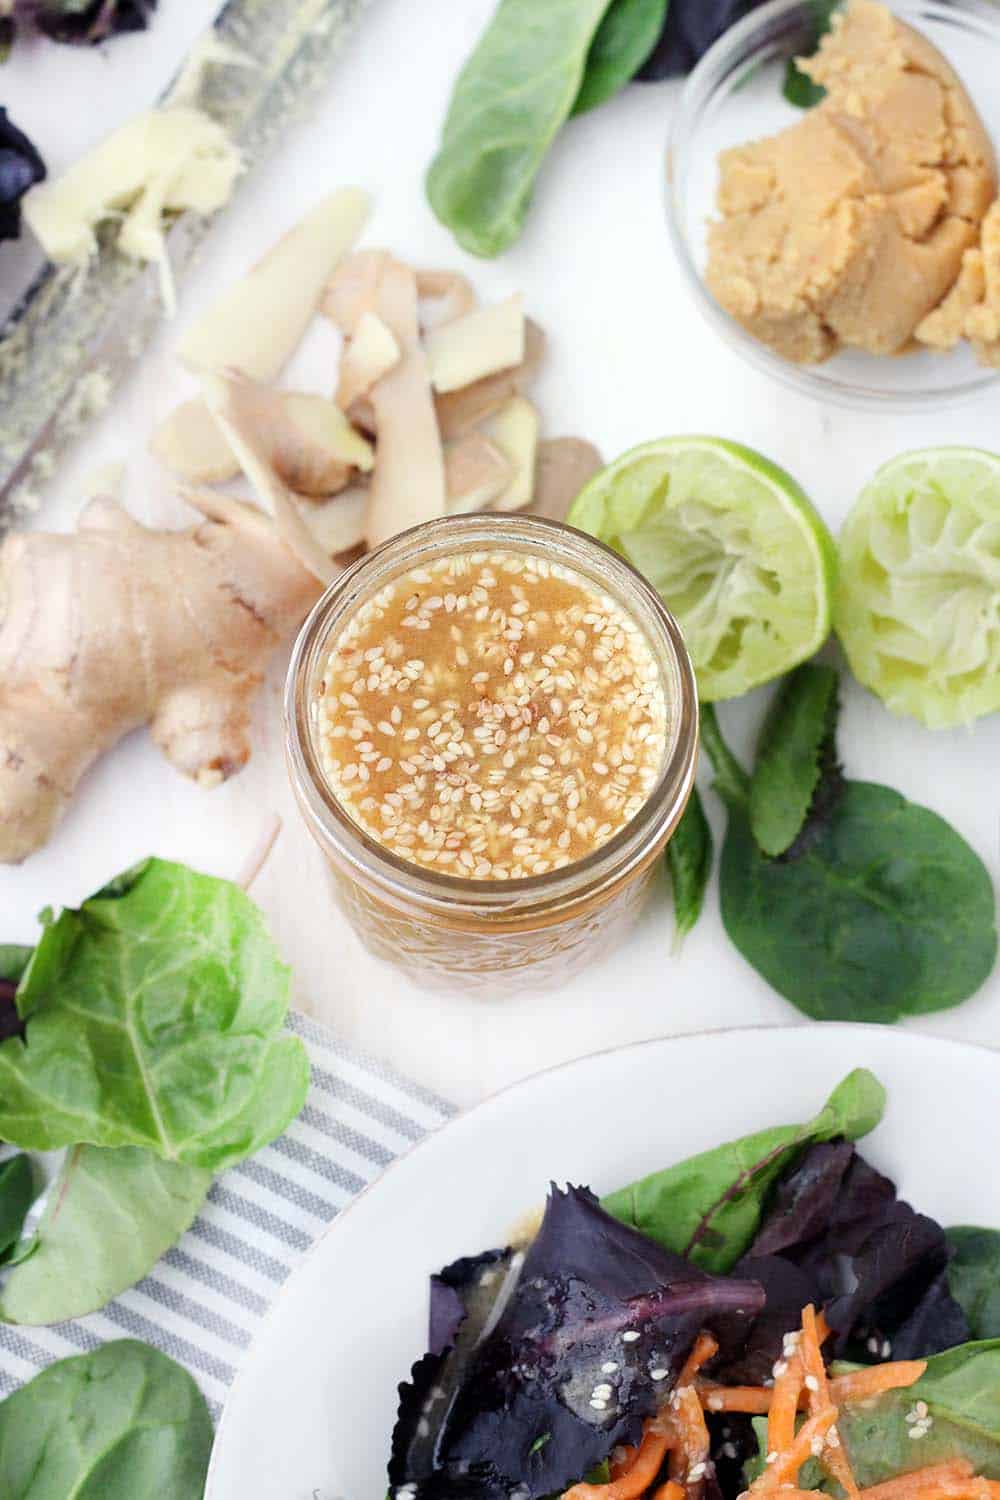 Bird's eye view of open glass jar filled with peanut dressing with sesame seeds mixed in, on white surface with fresh produce scattered around the jar.